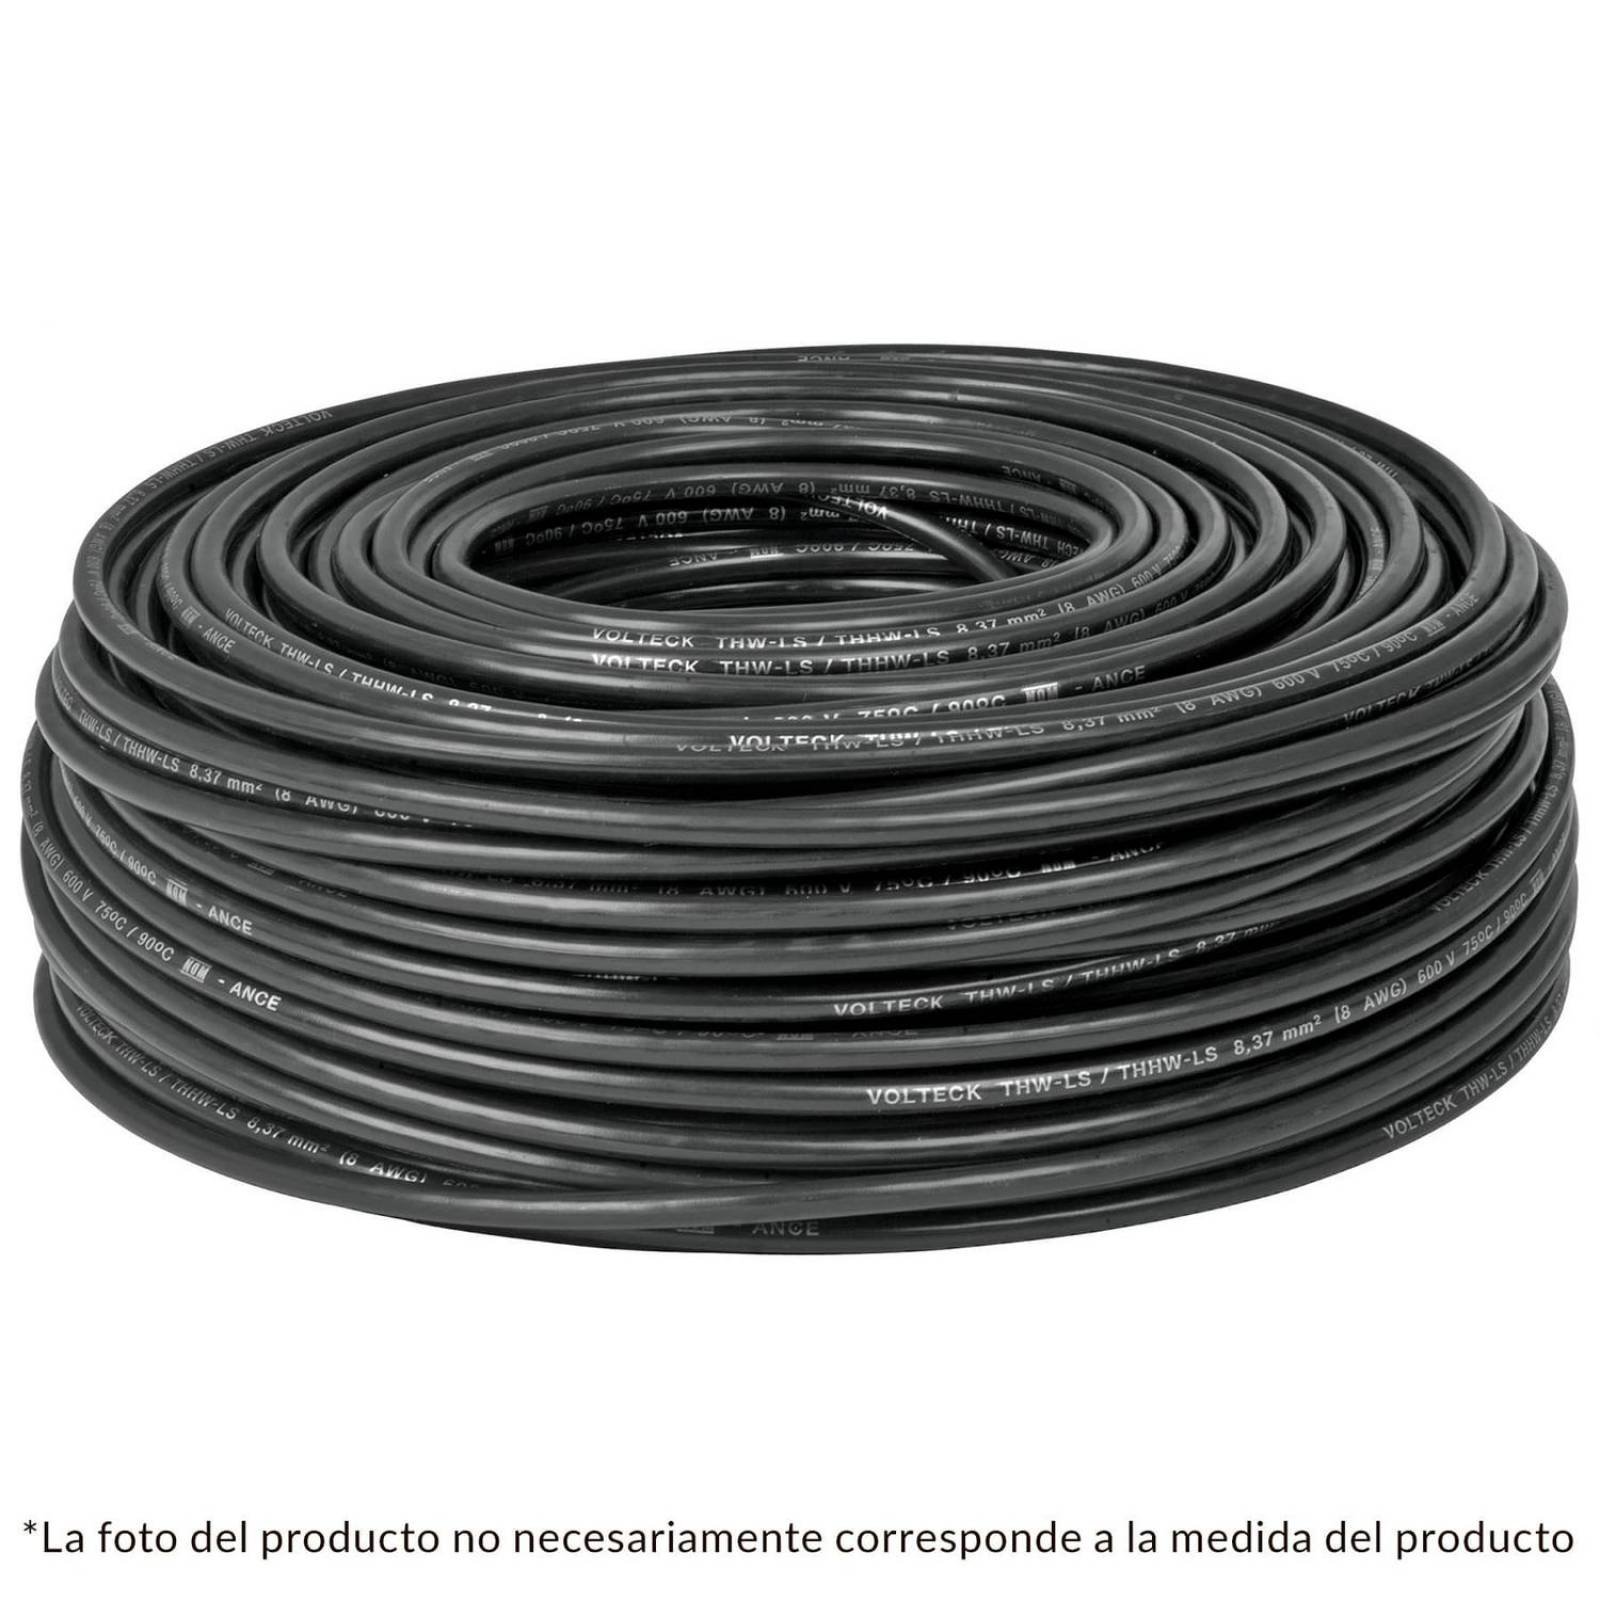 Cable THHW-LS, 12 AWG, color negro rollo 100 m Volteck 